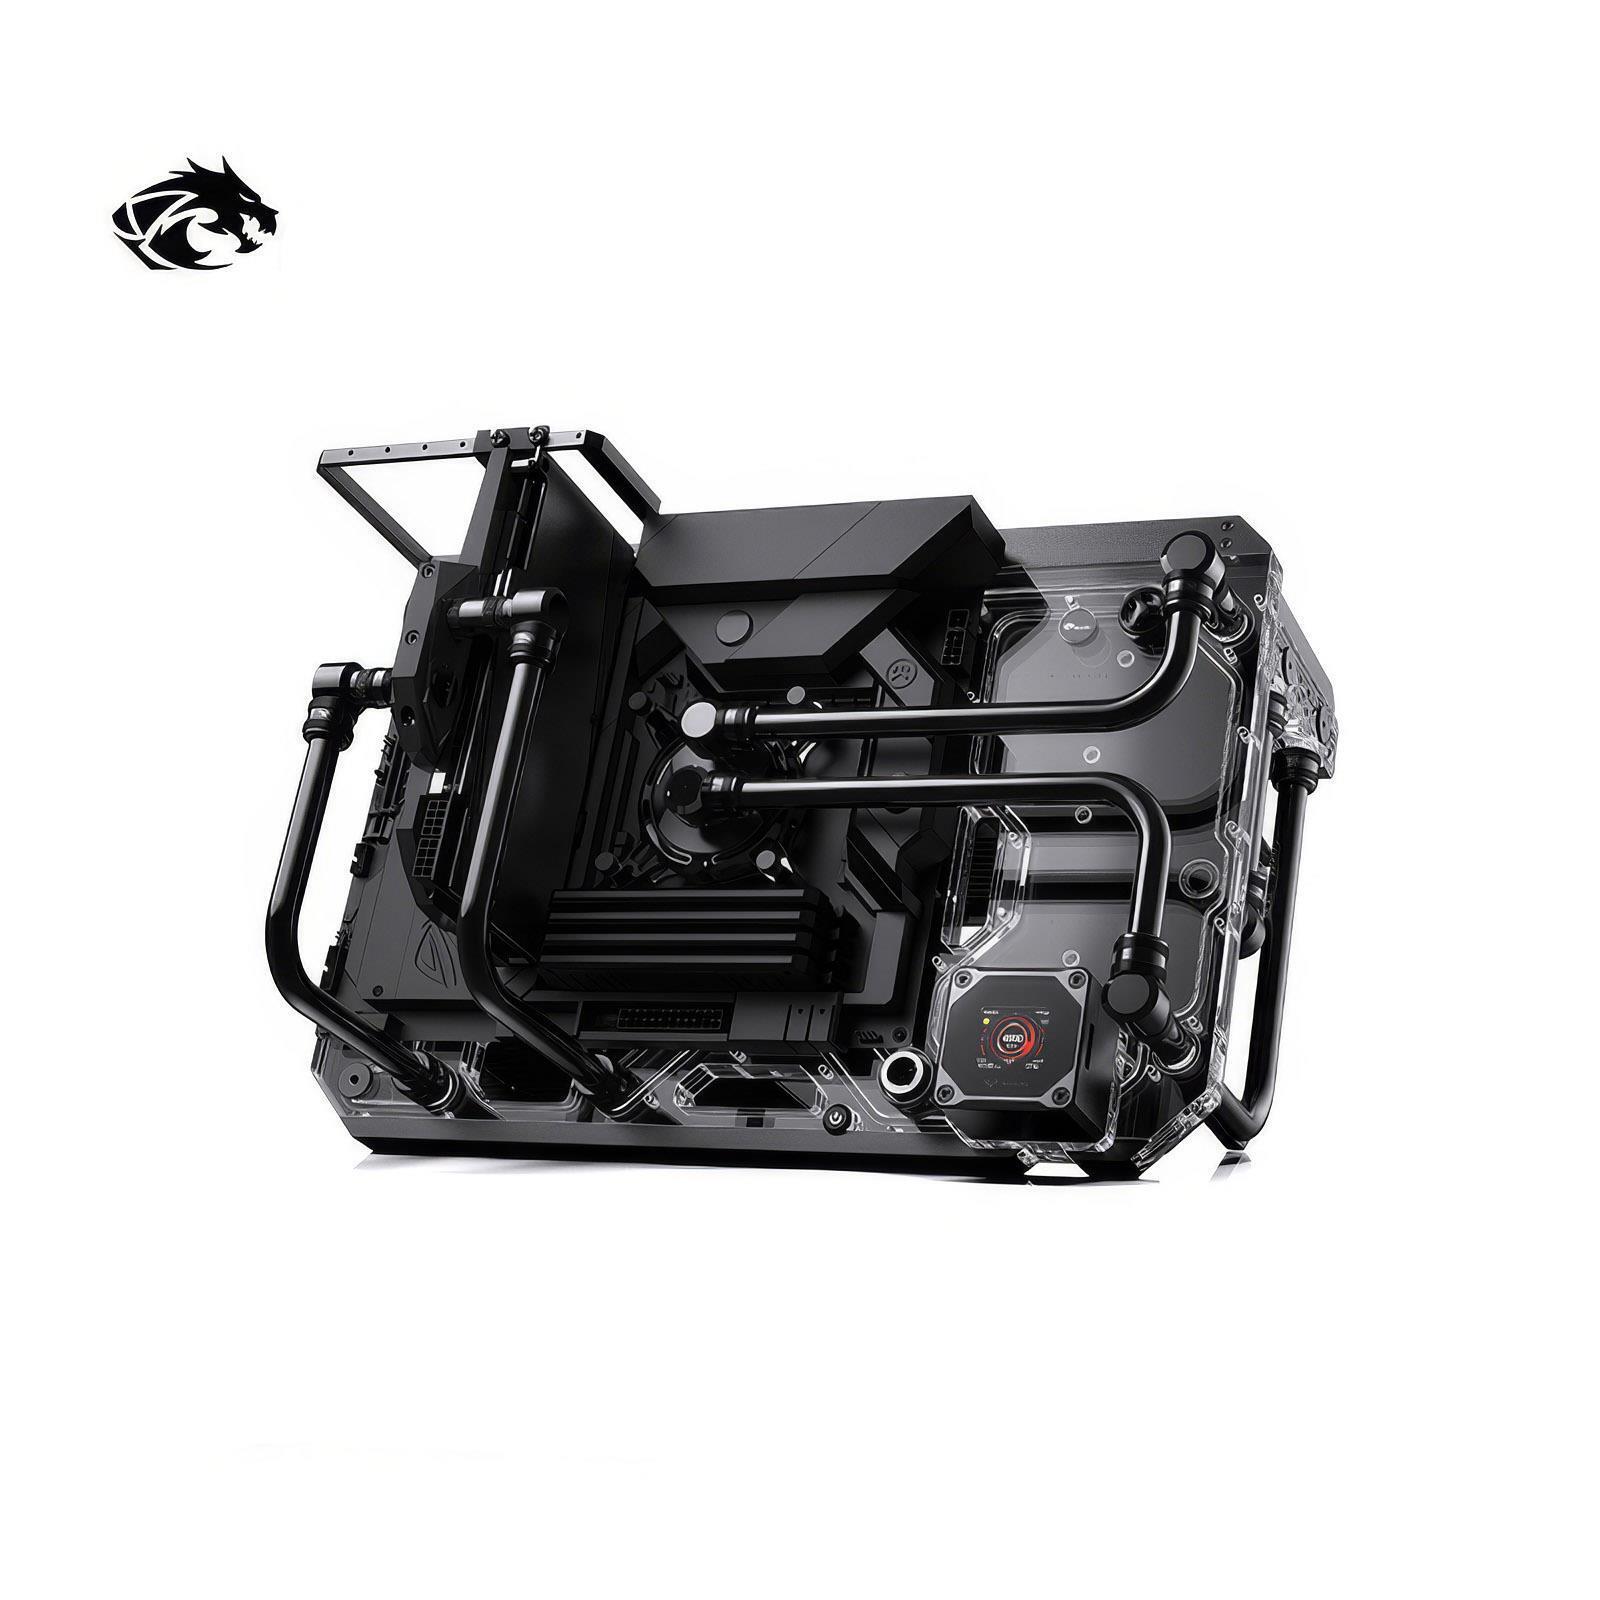 Gnorium Aluminum Open Frame Chassis Water Cooling Computer Case Chassis B-CEC-X